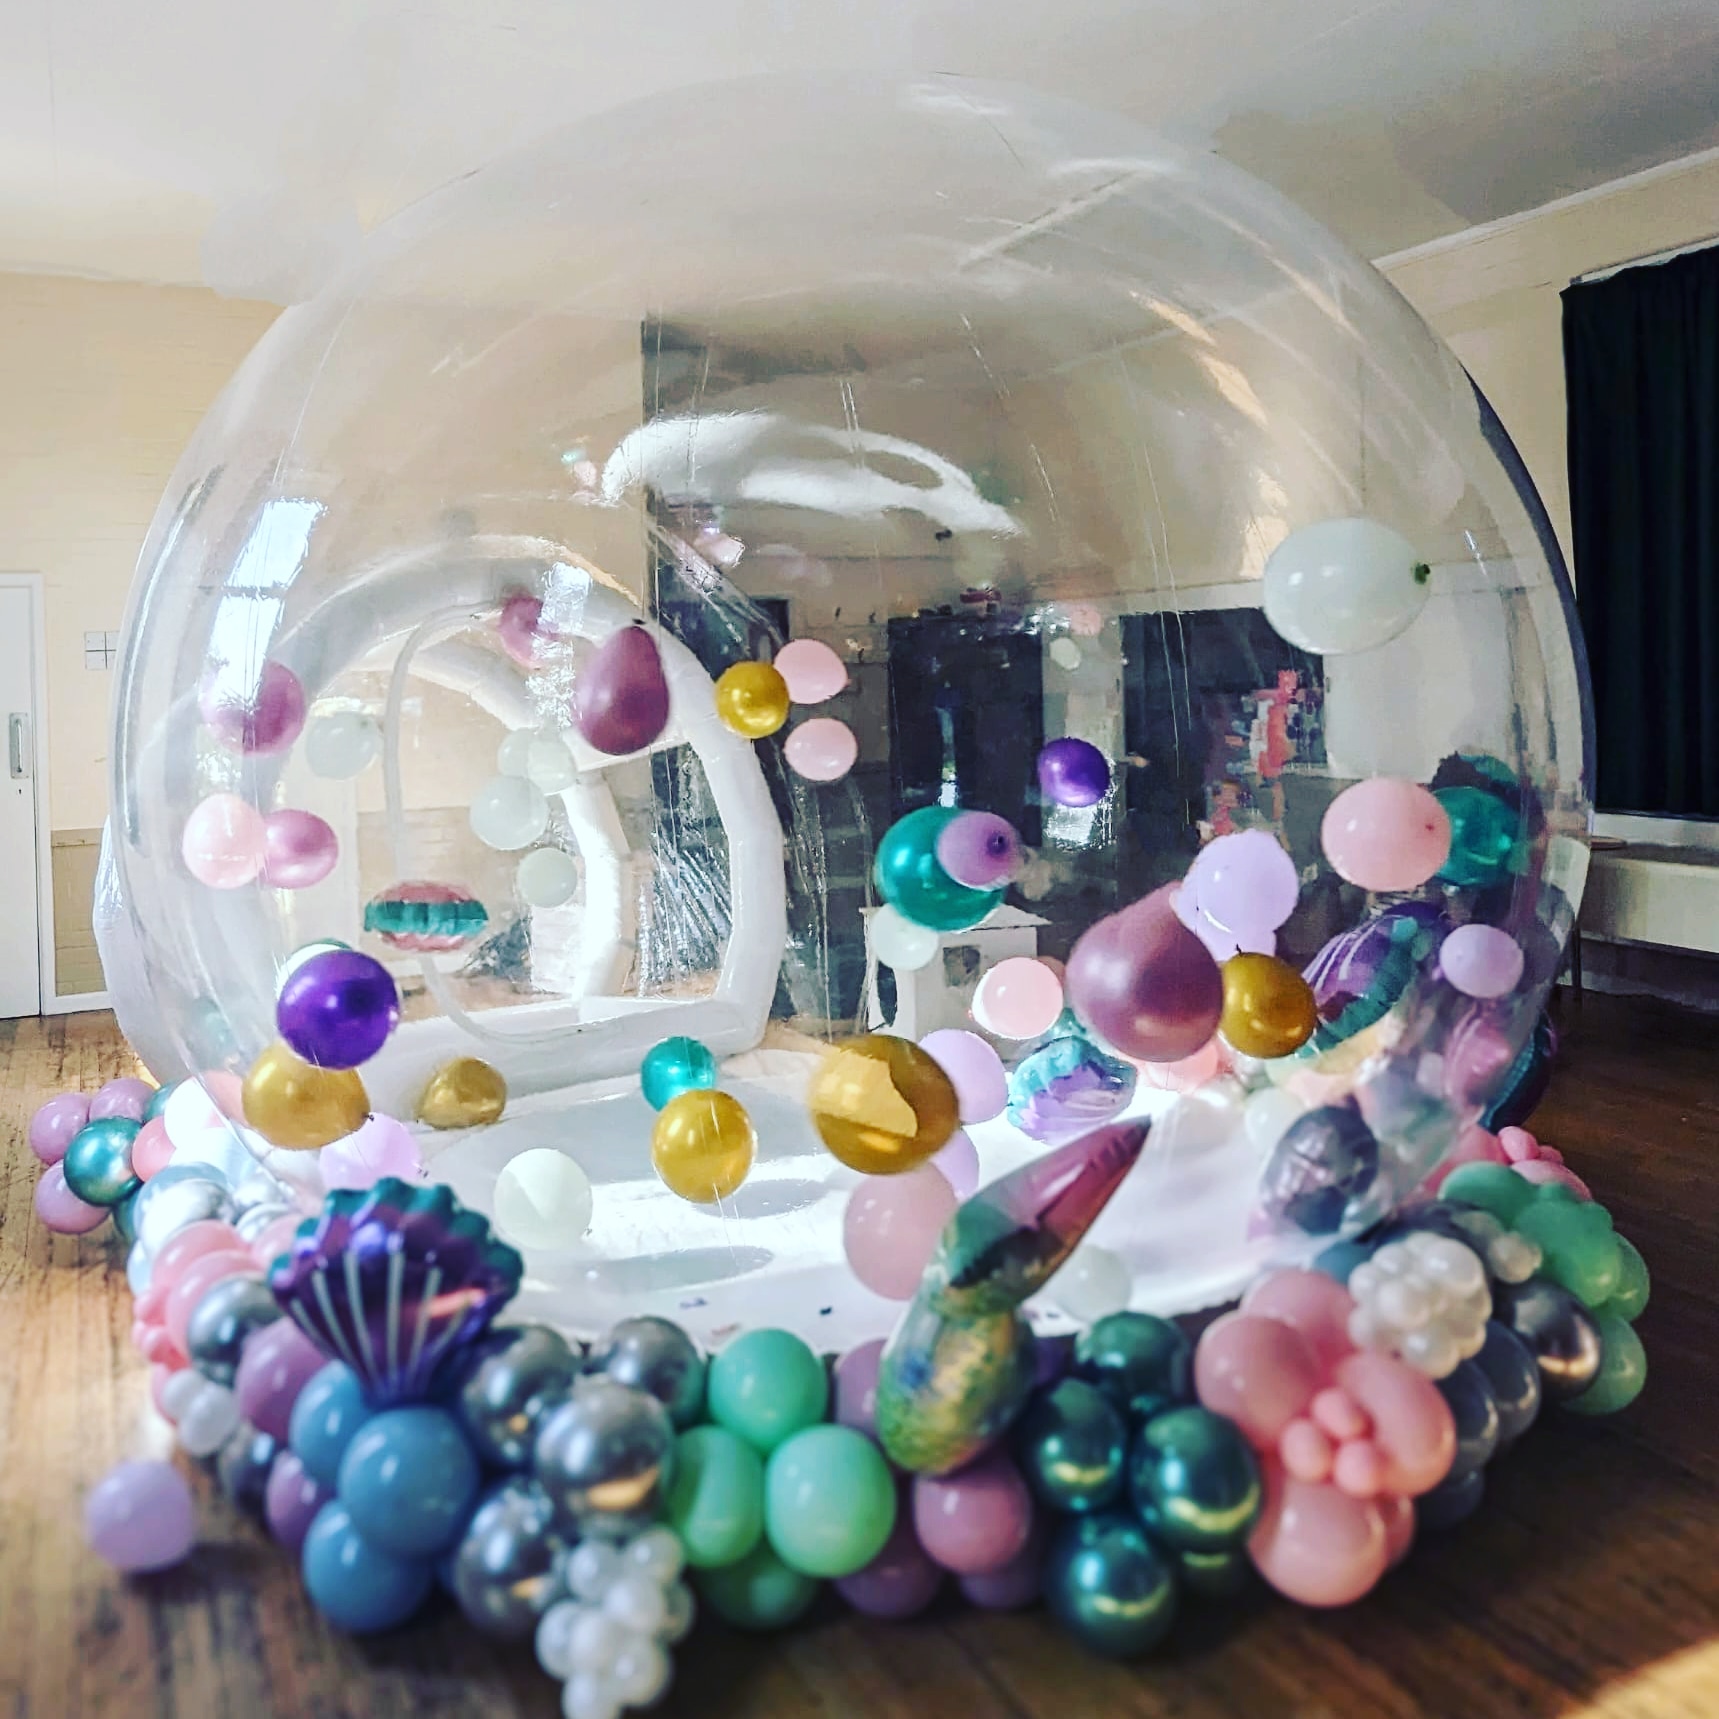 Sussex & Surrey Inflatable Balloon House